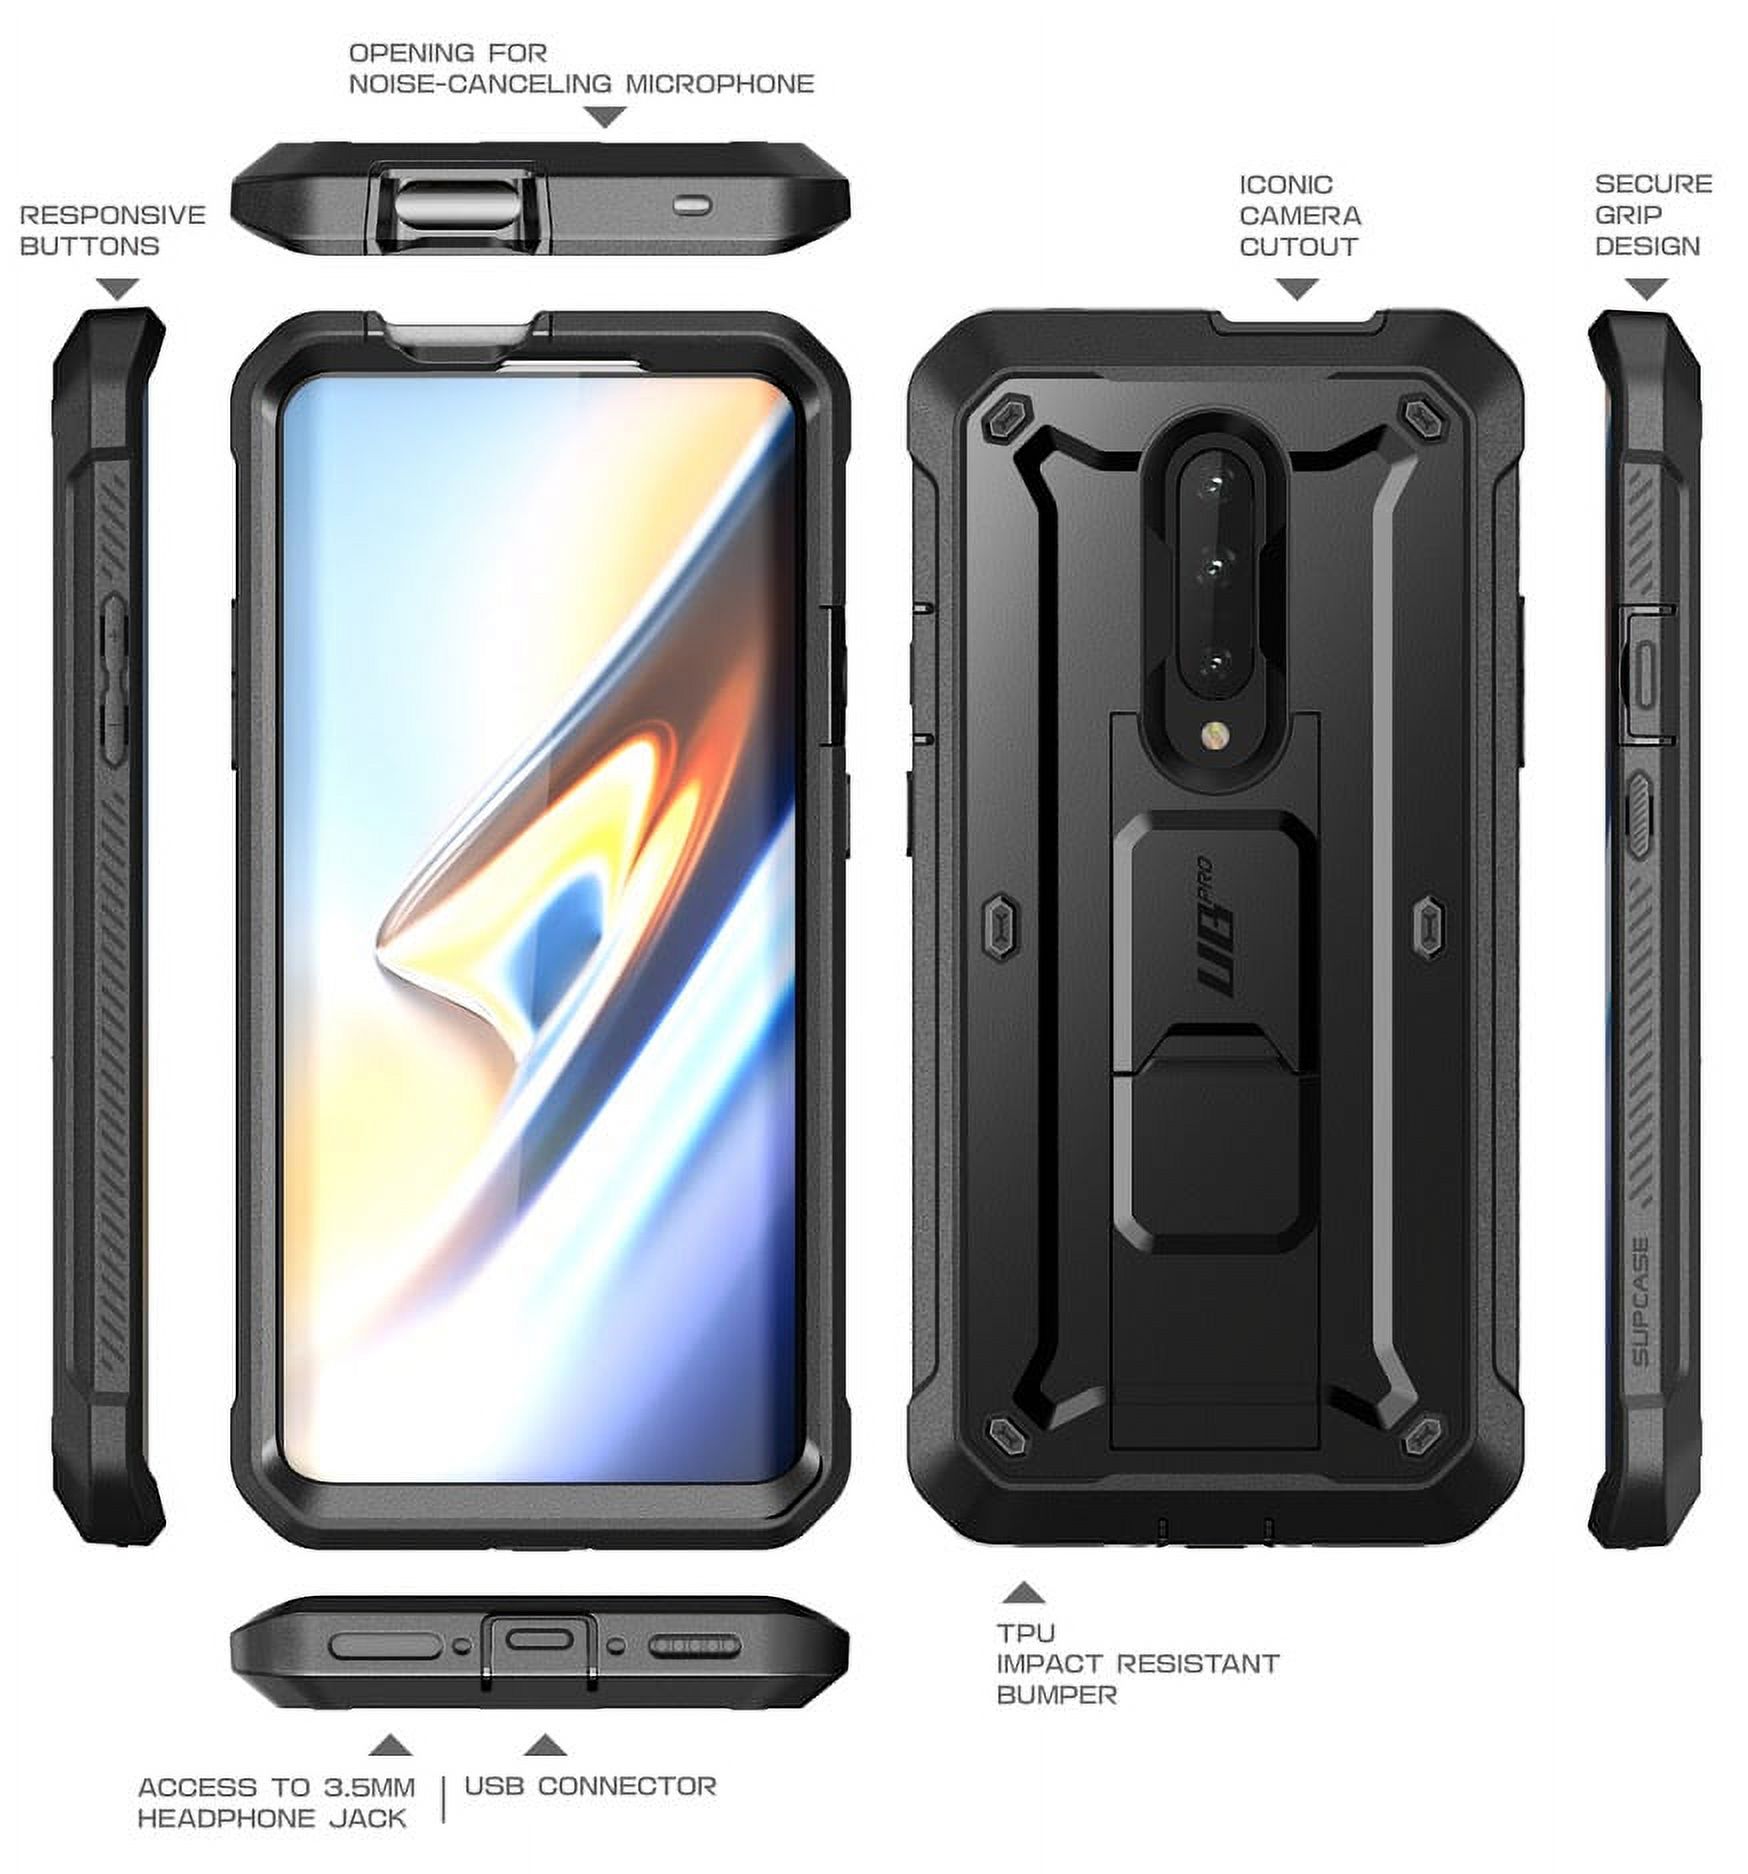 SUPCASE Unicorn Beetle Pro Series Case for OnePlus 7 Pro, Full-Body Rugged Holster Kickstand OnePlus 7 Pro Case with Built-in Screen Protector (Black) - image 3 of 8